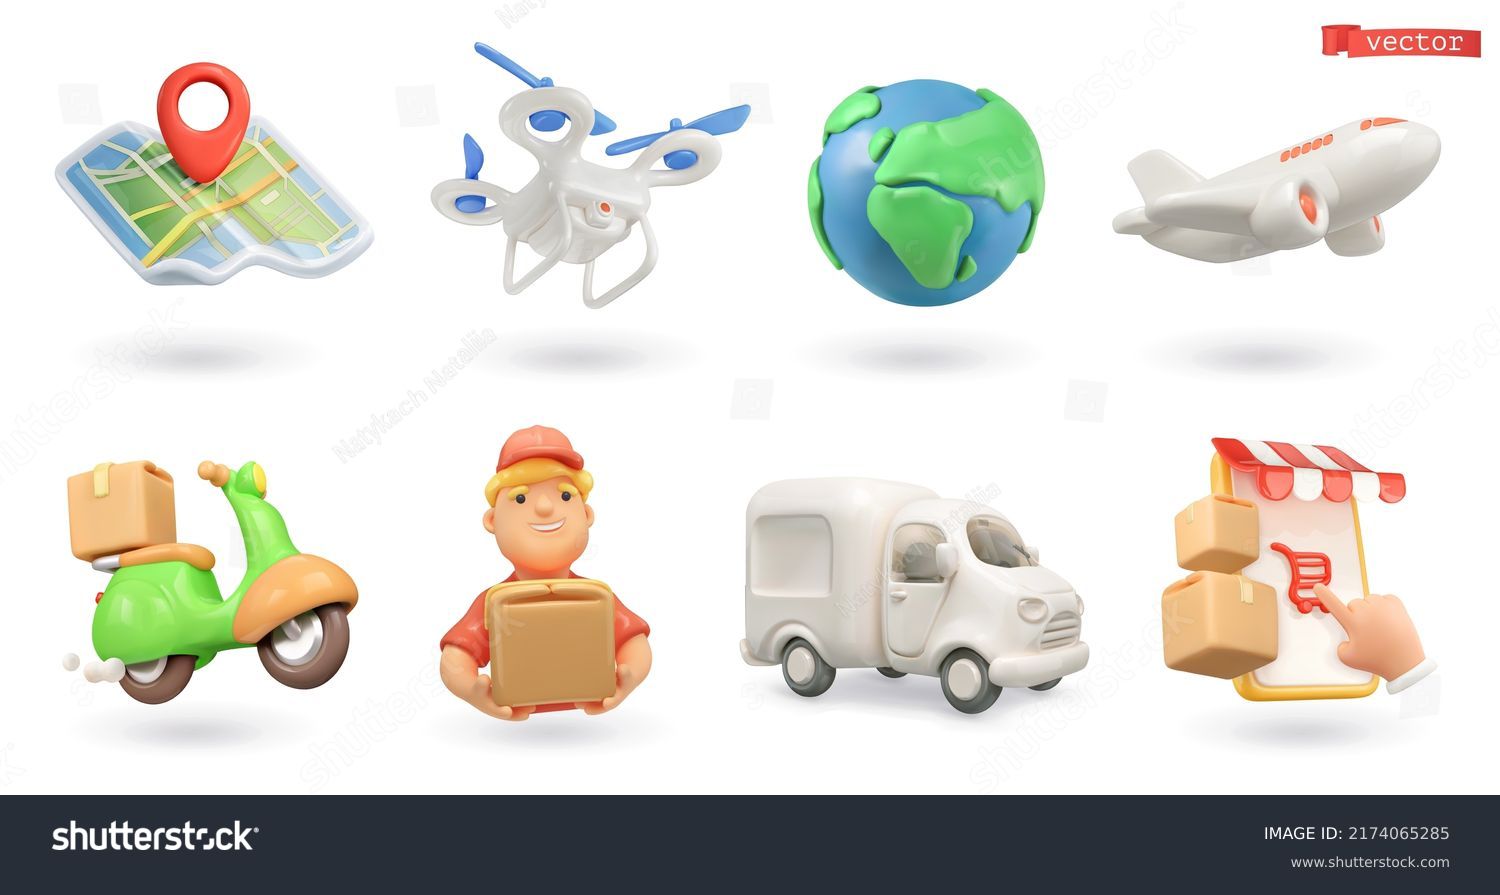 Delivery icons 3d render vector set. Map, drone, earth, aircraft, motorcycle, delivery man, truck, online store #2174065285